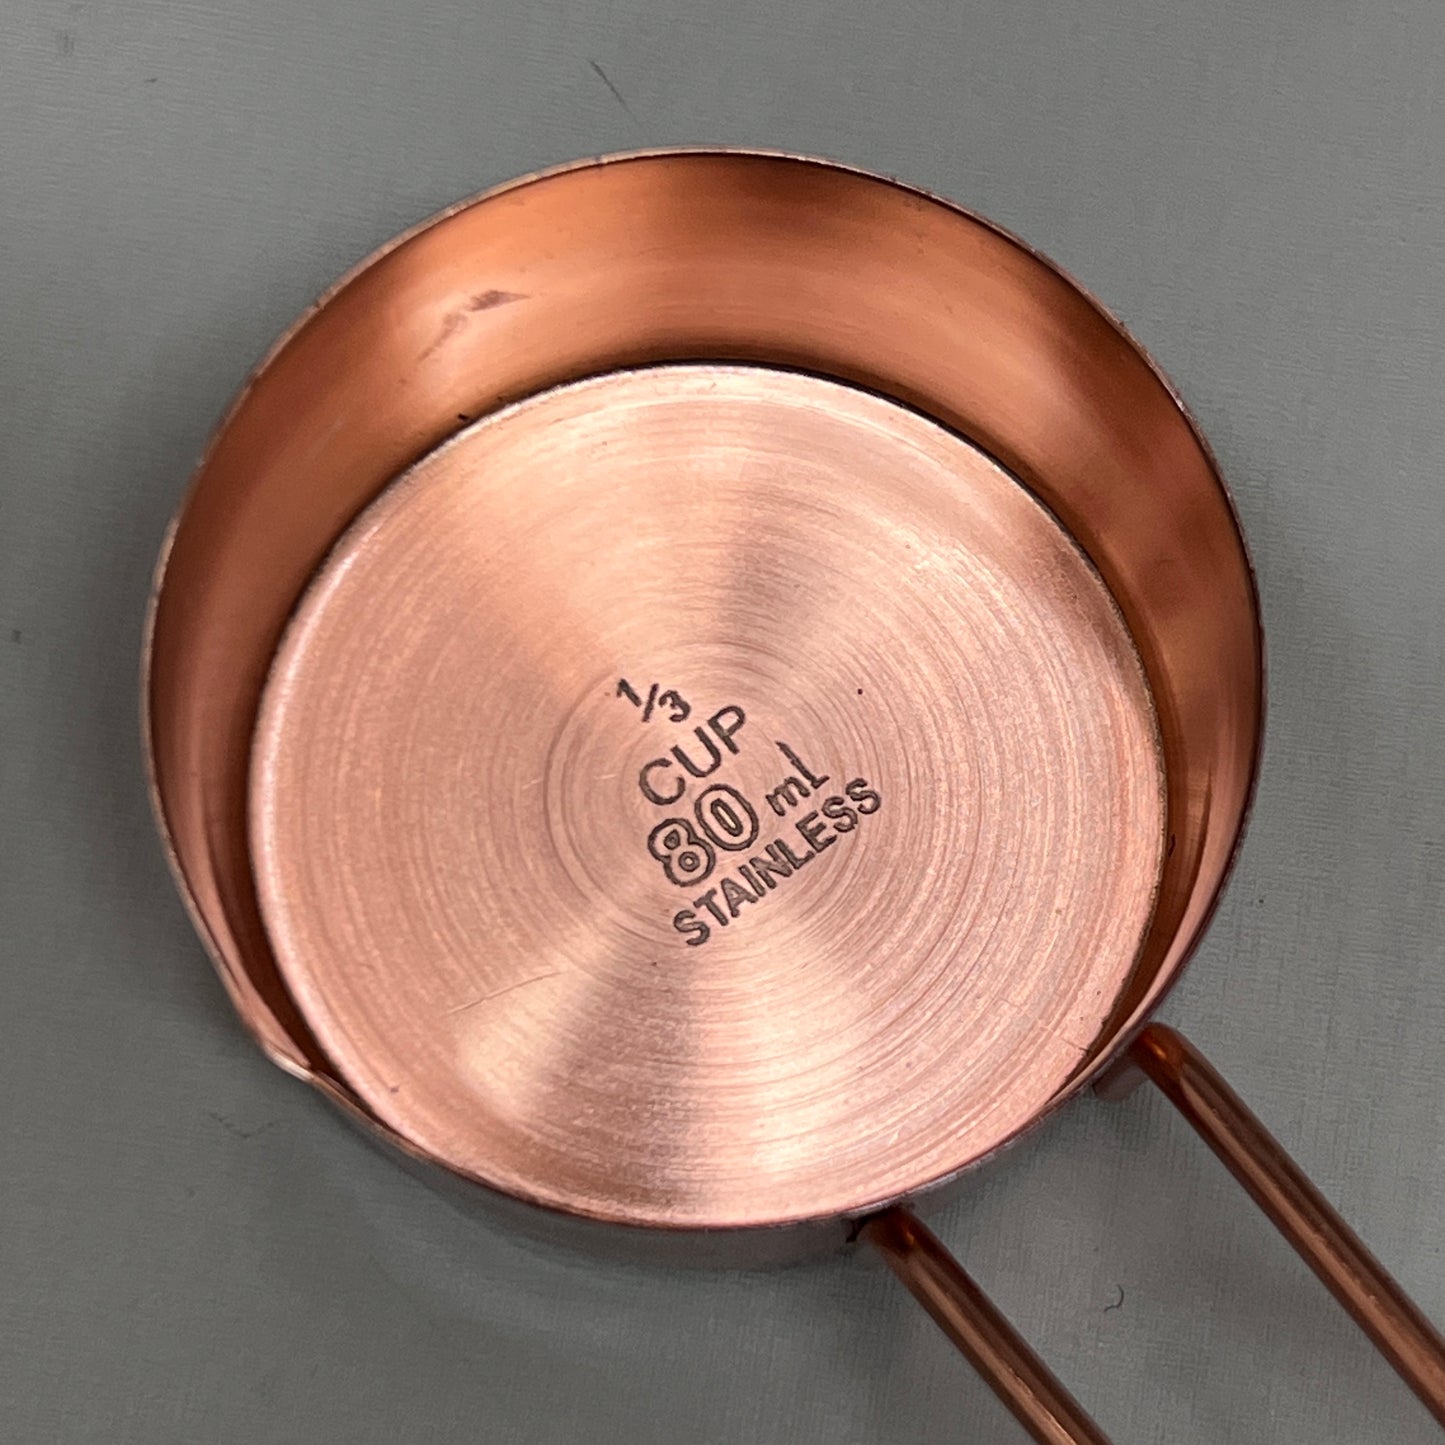 NOW DESIGNS 4-PACK! Stainless Steel Measuring Cups Rose Gold 5227002 (New)